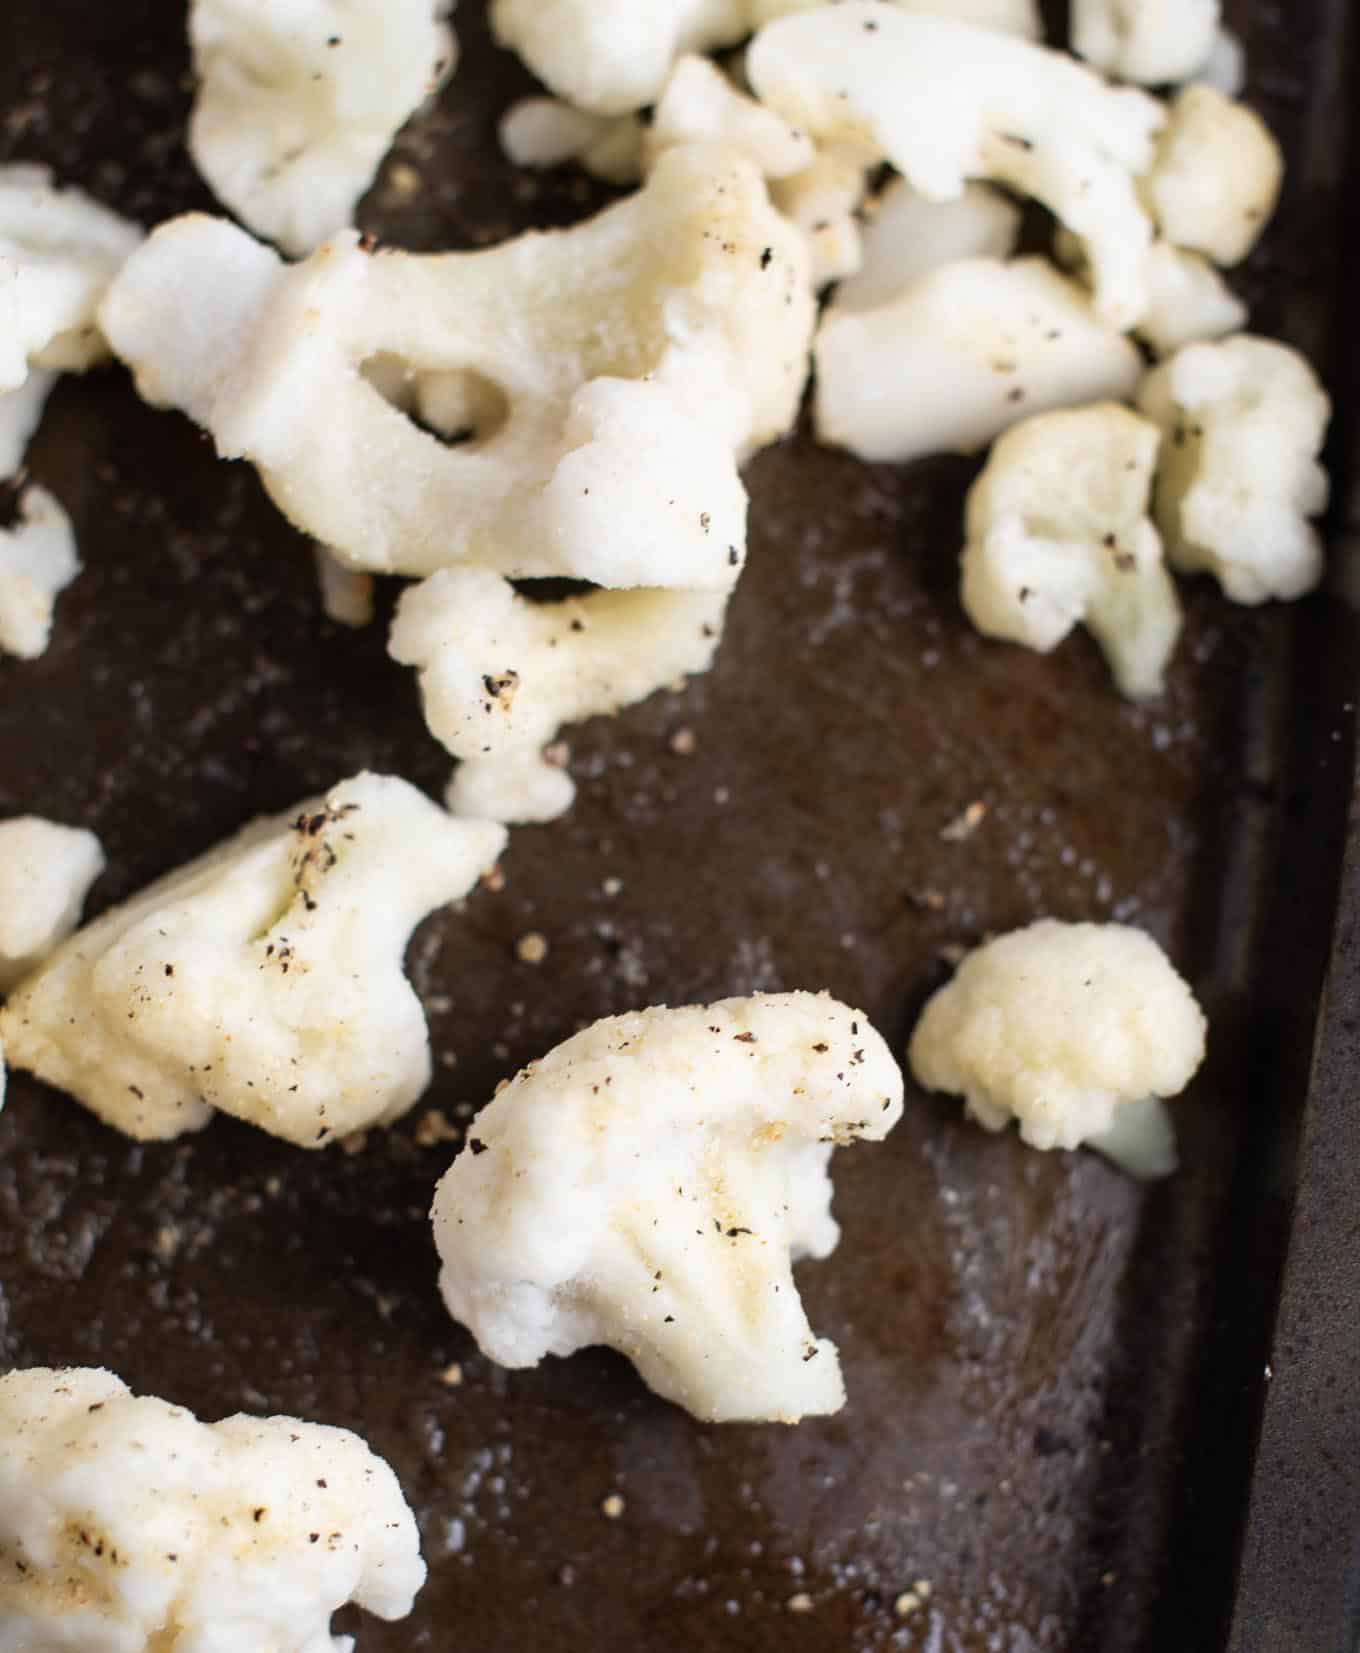 frozen cauliflower on a baking sheet with spices sprinkled on it before cooking